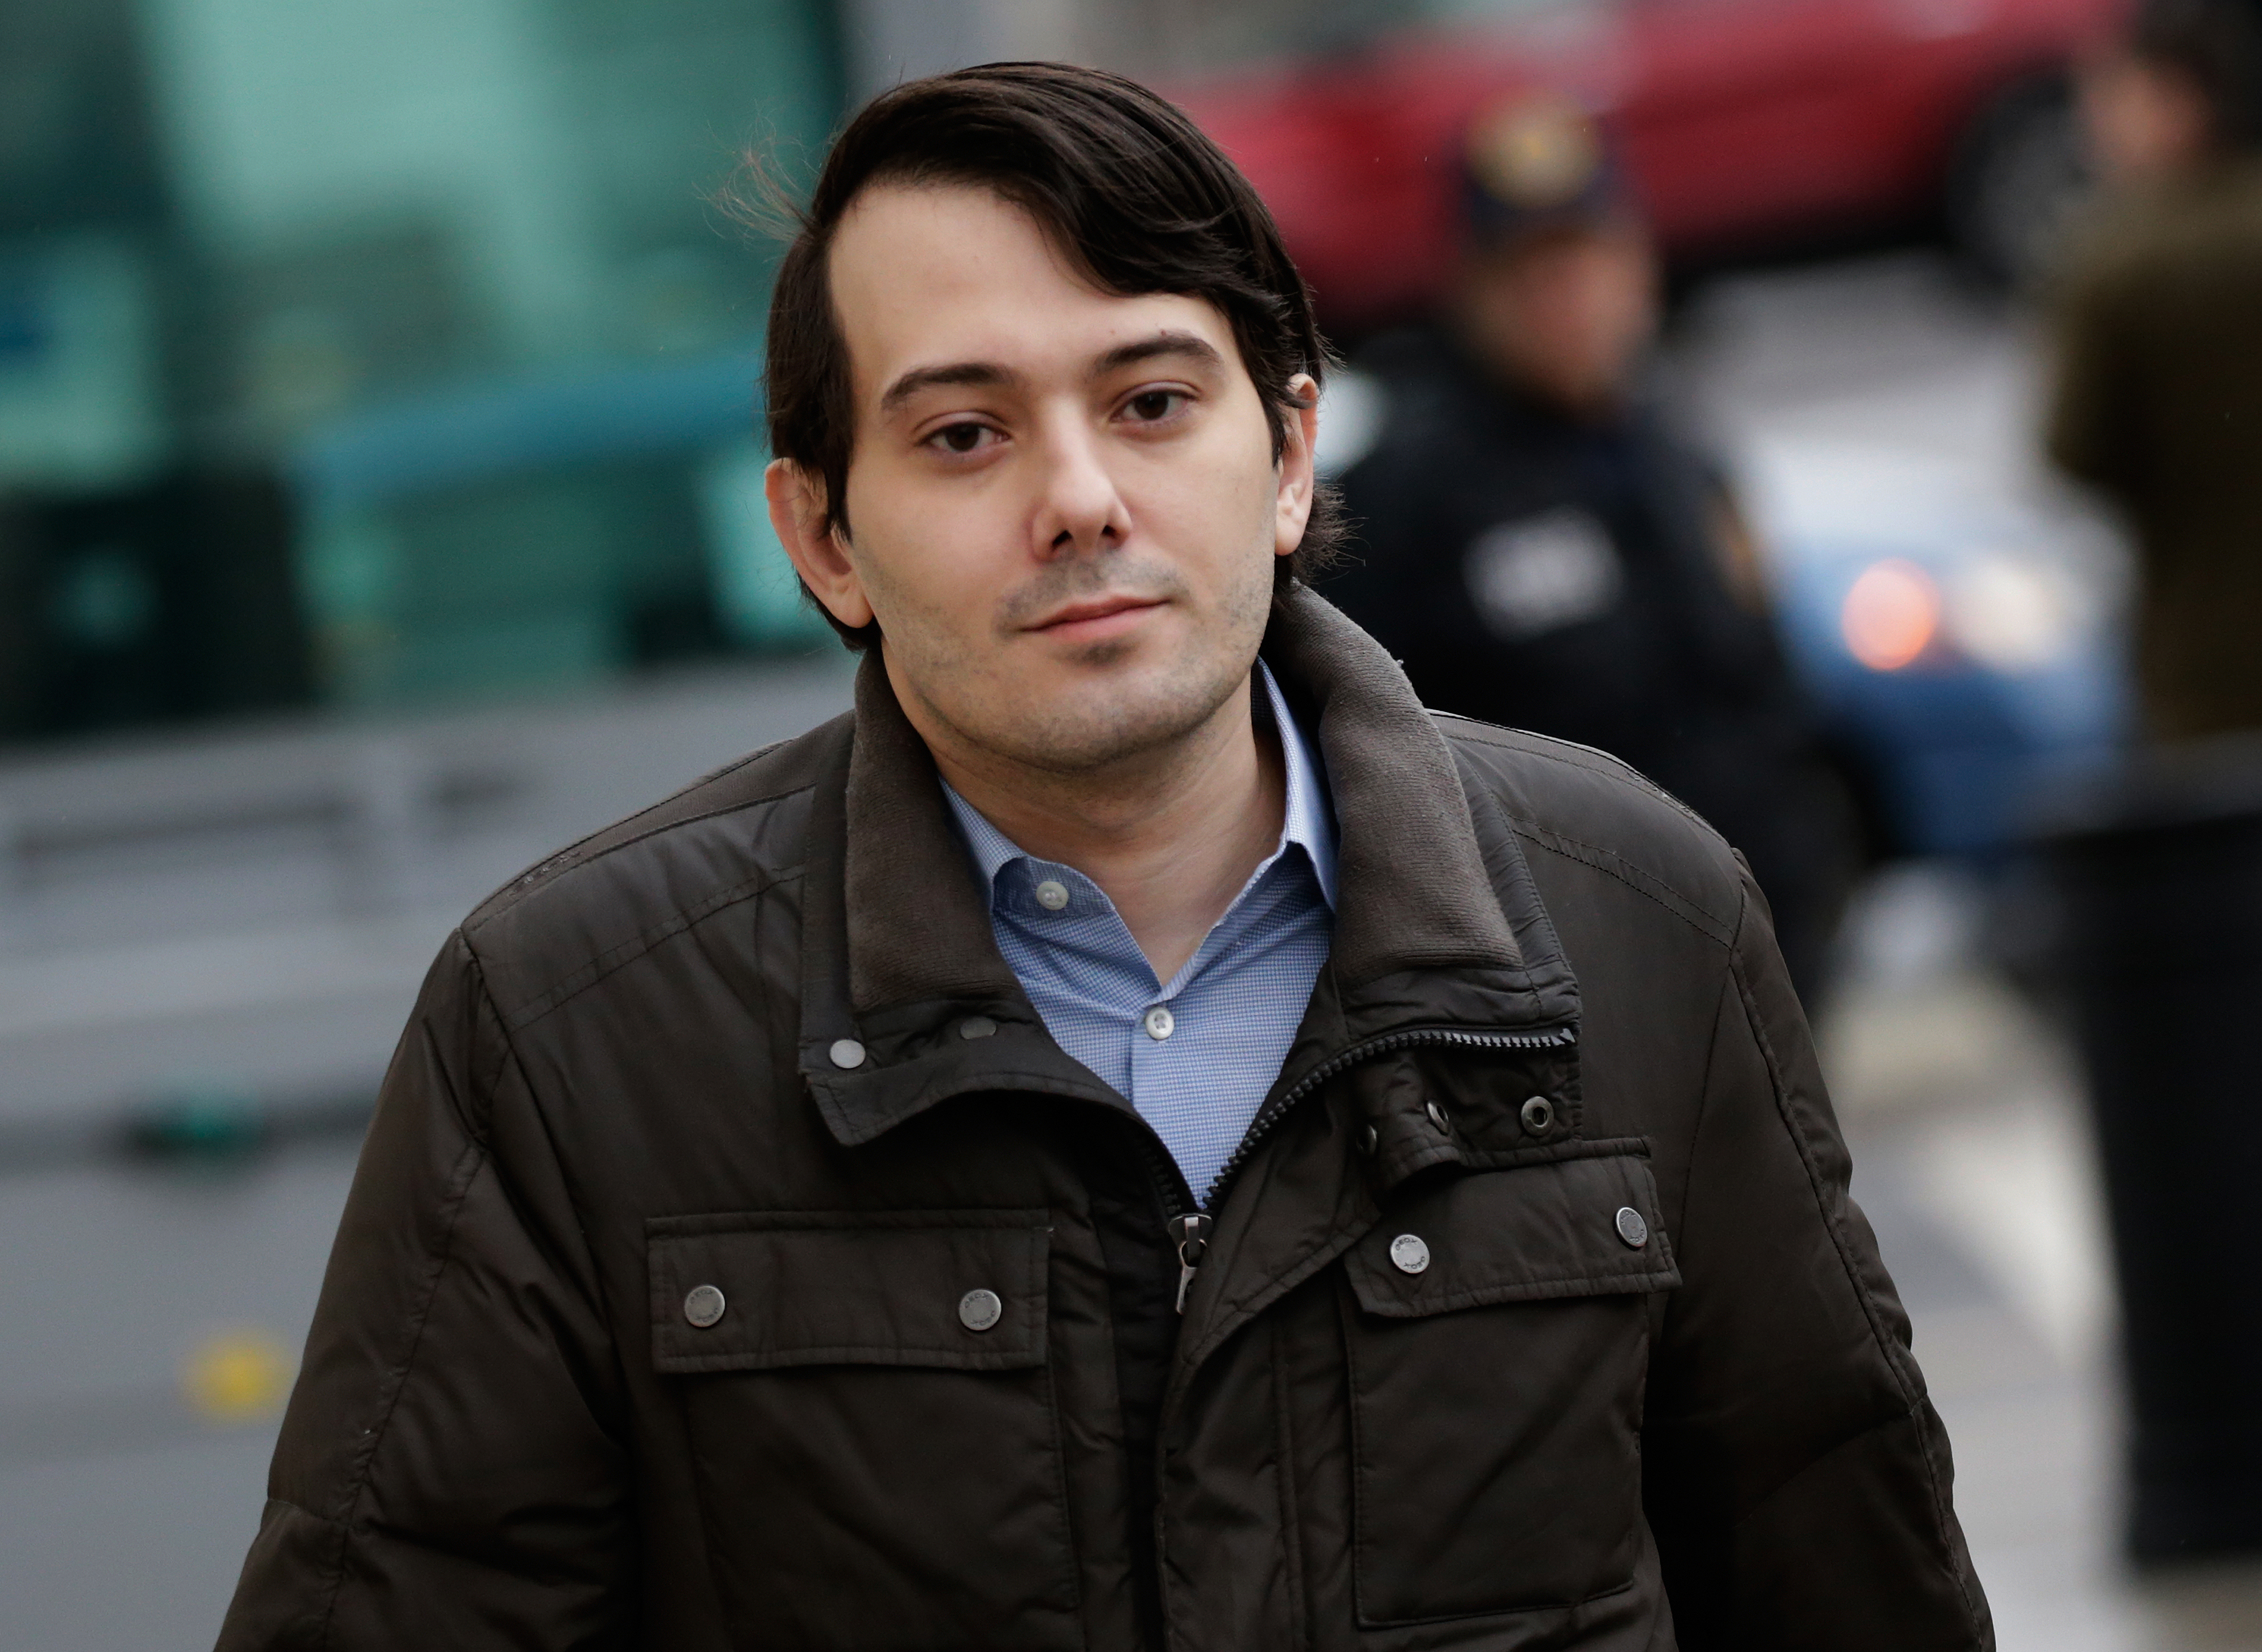 Martin Shkreli, former chief executive officer of Turing Pharmaceuticals LLC, arrives at federal court in the Brooklyn borough of New York, U.S., on Wednesday, Feb. 3, 2016. Shkreli, charged with securities fraud and called before a congressional panel, has replaced his legal team with Benjamin Brafman, the lawyer who helped get Sean "Diddy" Combs acquitted of gun and bribery charges in 2001. (Bloomberg&mdash;Bloomberg via Getty Images)